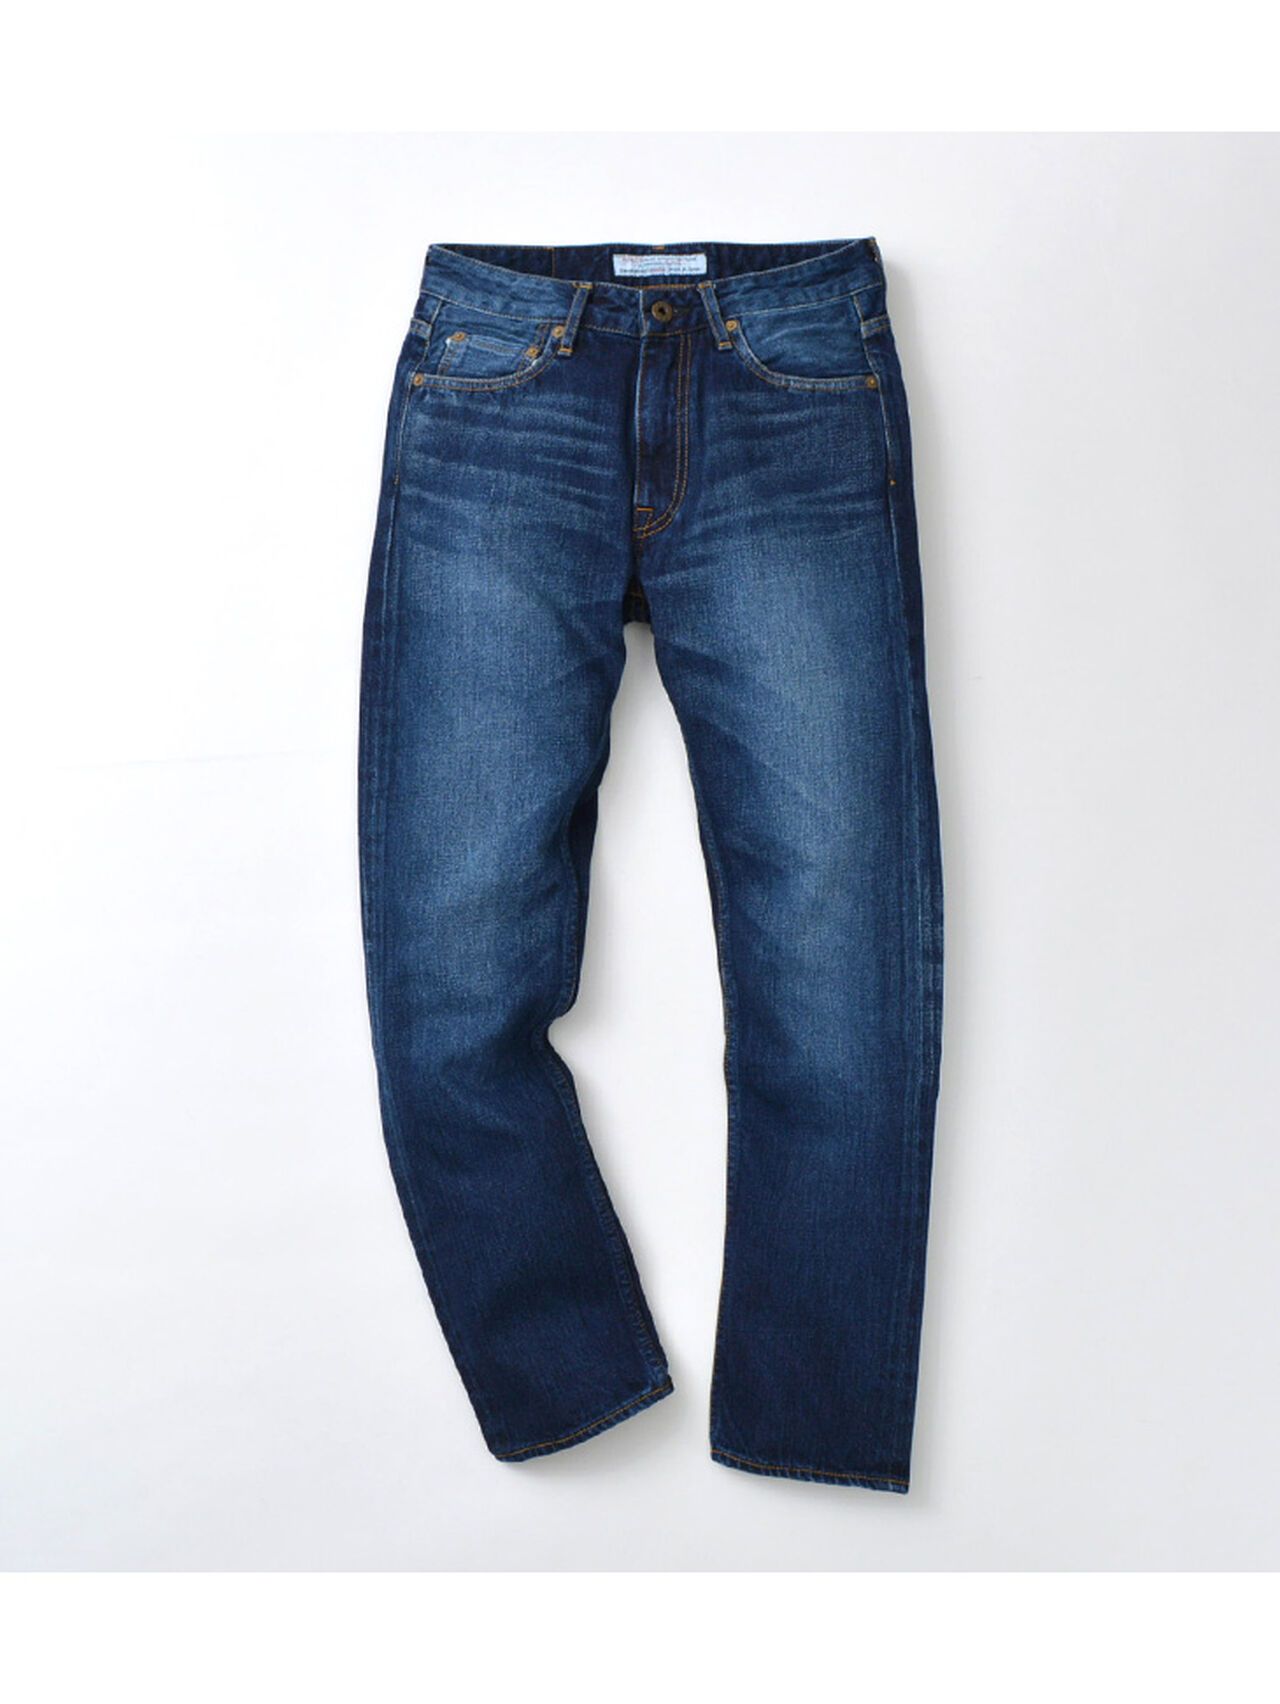 RJB6140-ME Selvic Ankle Cut Slim Tapered Jeans,, large image number 1